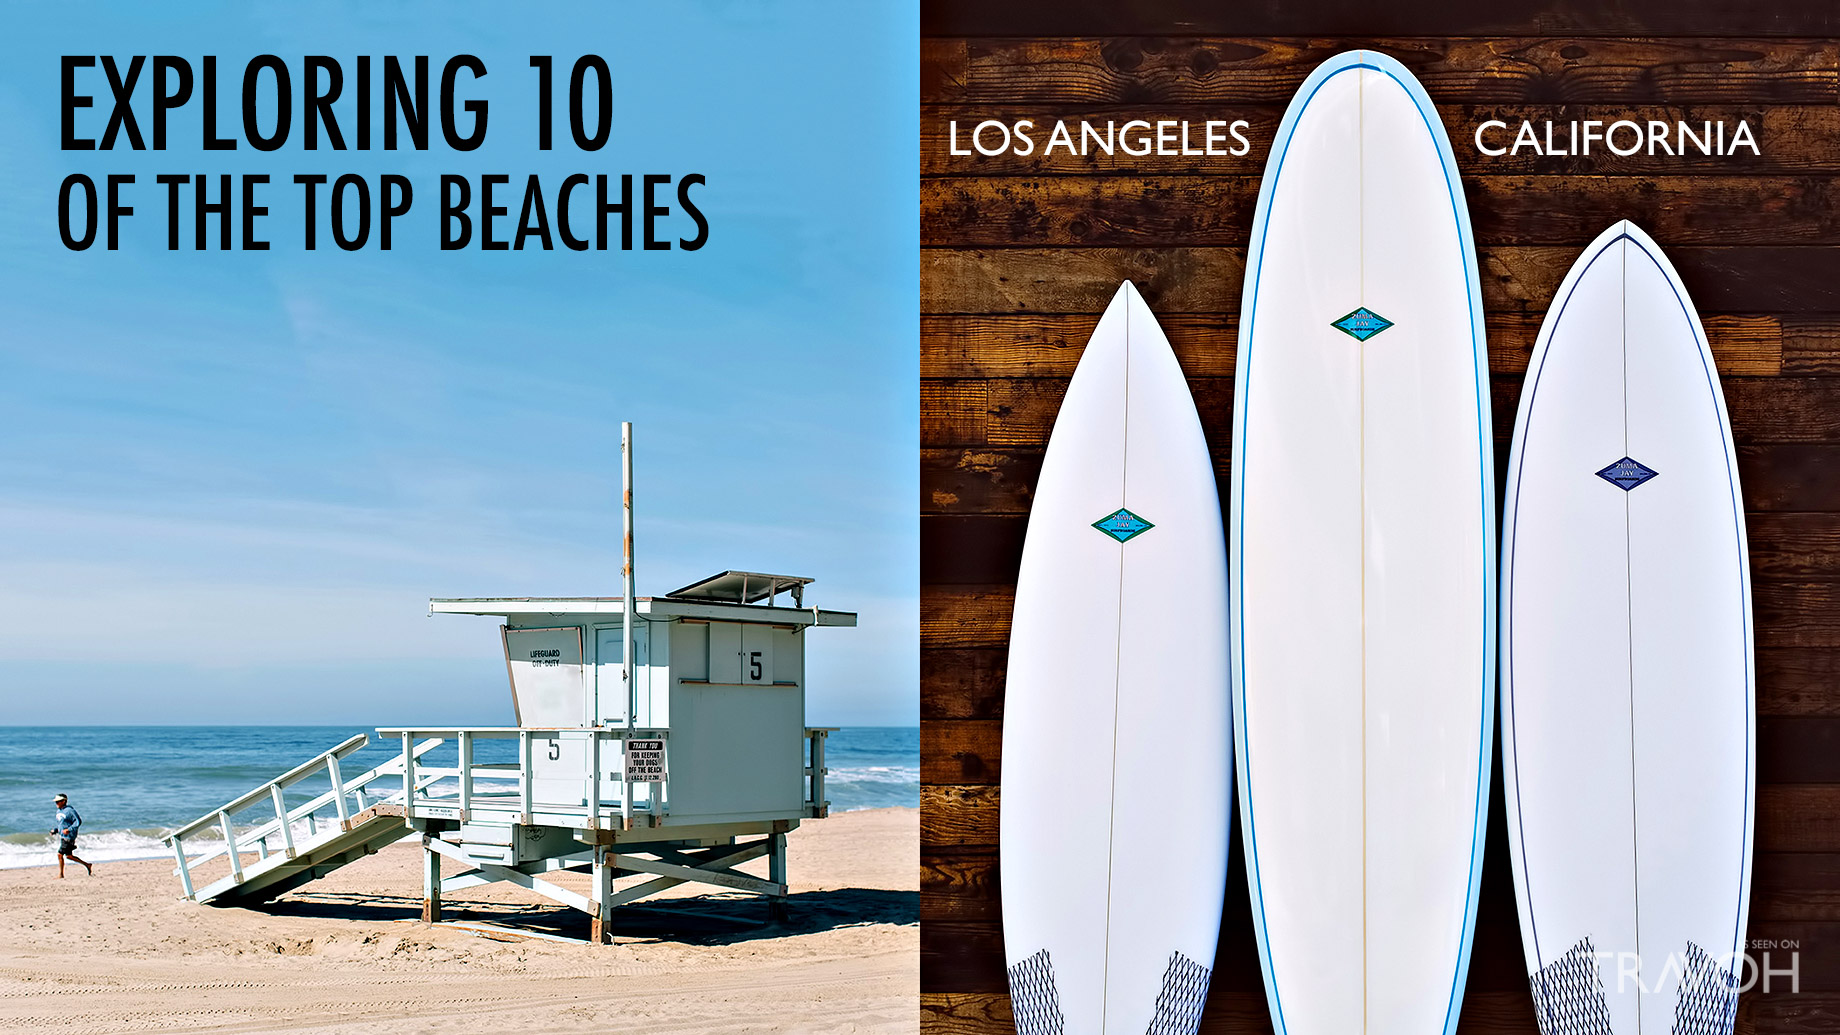 Exploring 10 of the Top Beaches in Los Angeles, California